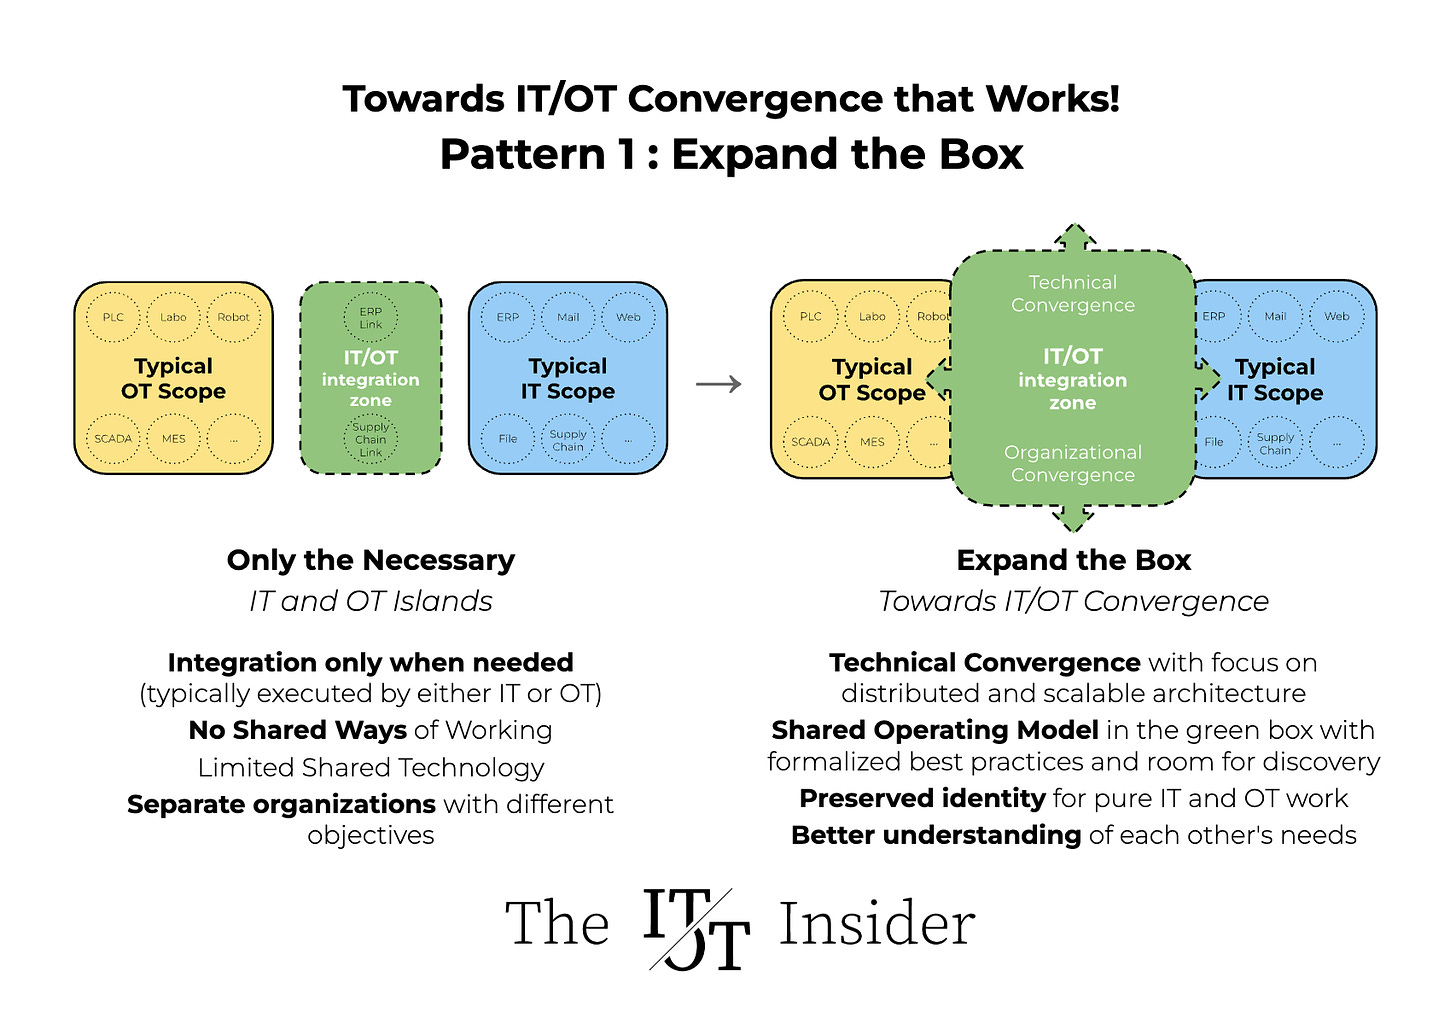 Towards IT/OT Convergence that works: Expand the Box